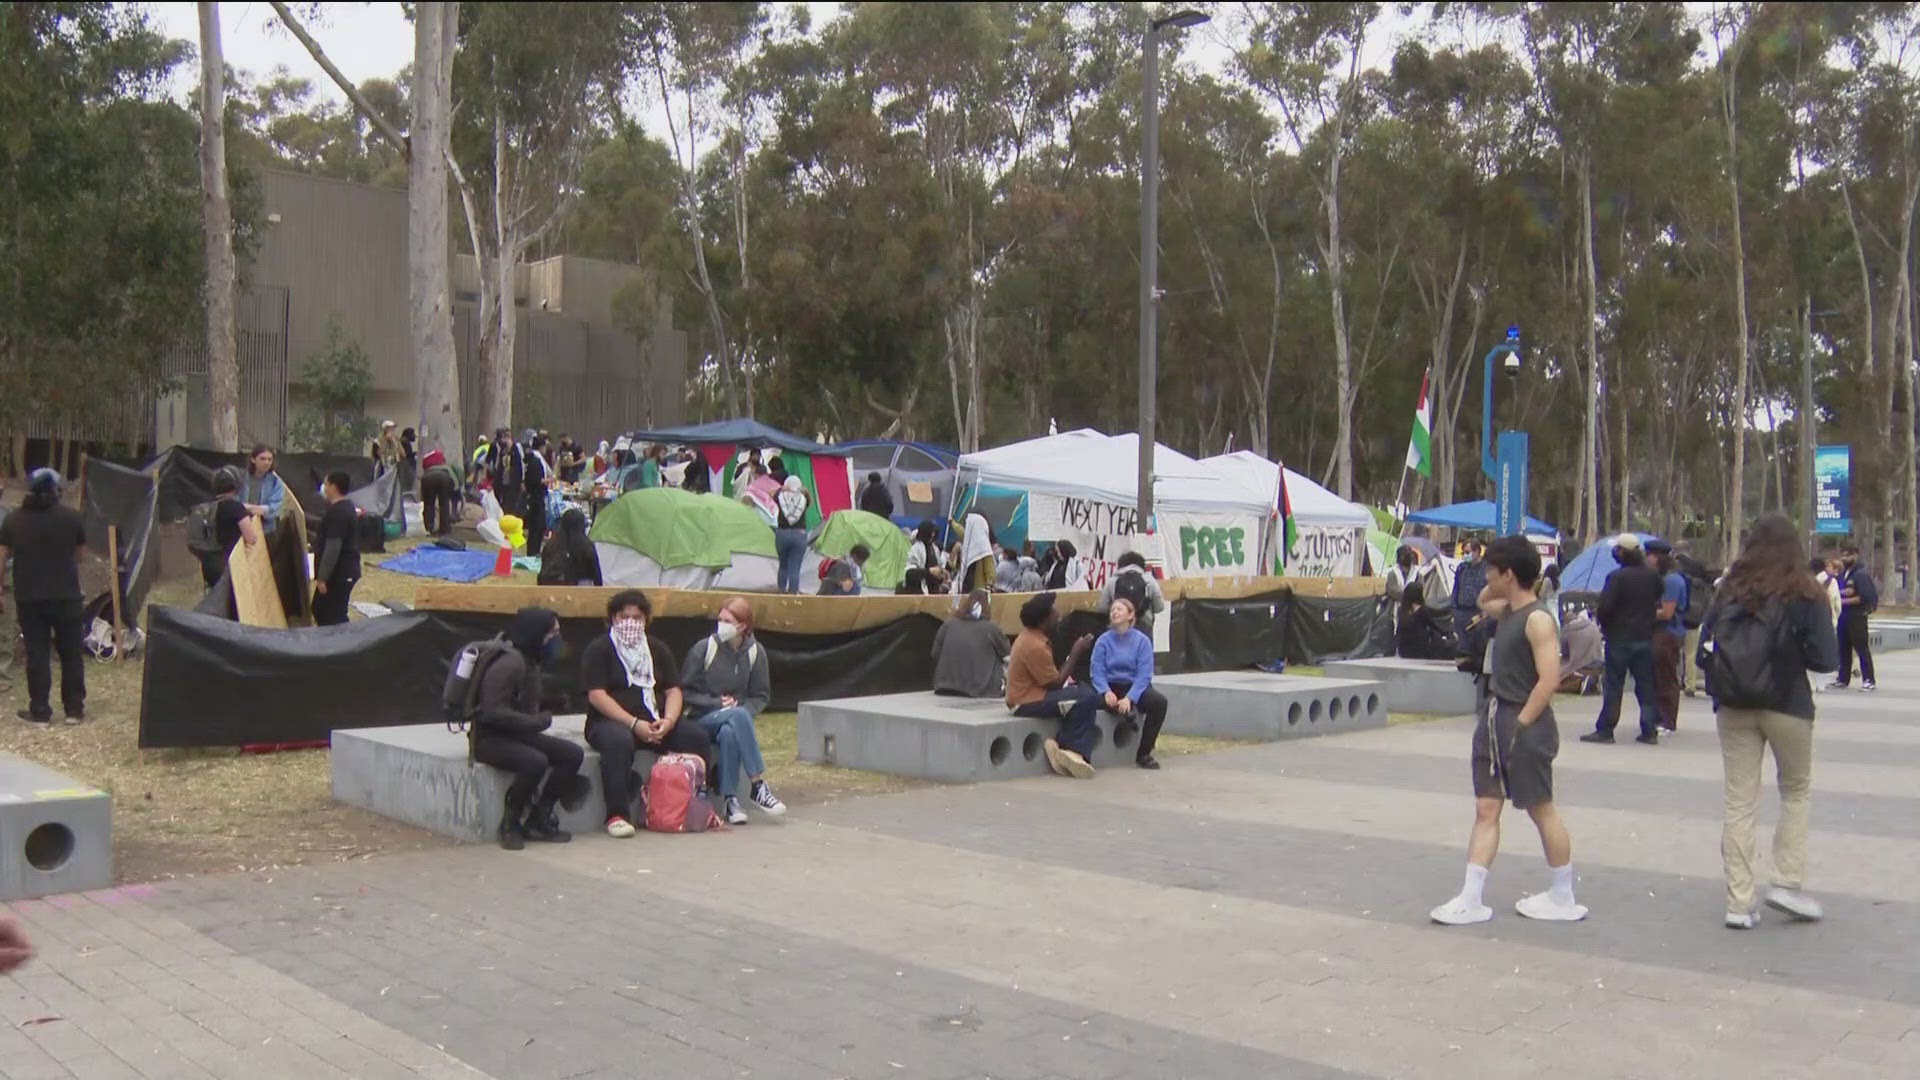 Protests against the war in Gaza entered a second day on the campus of UC San Diego on Thursday.